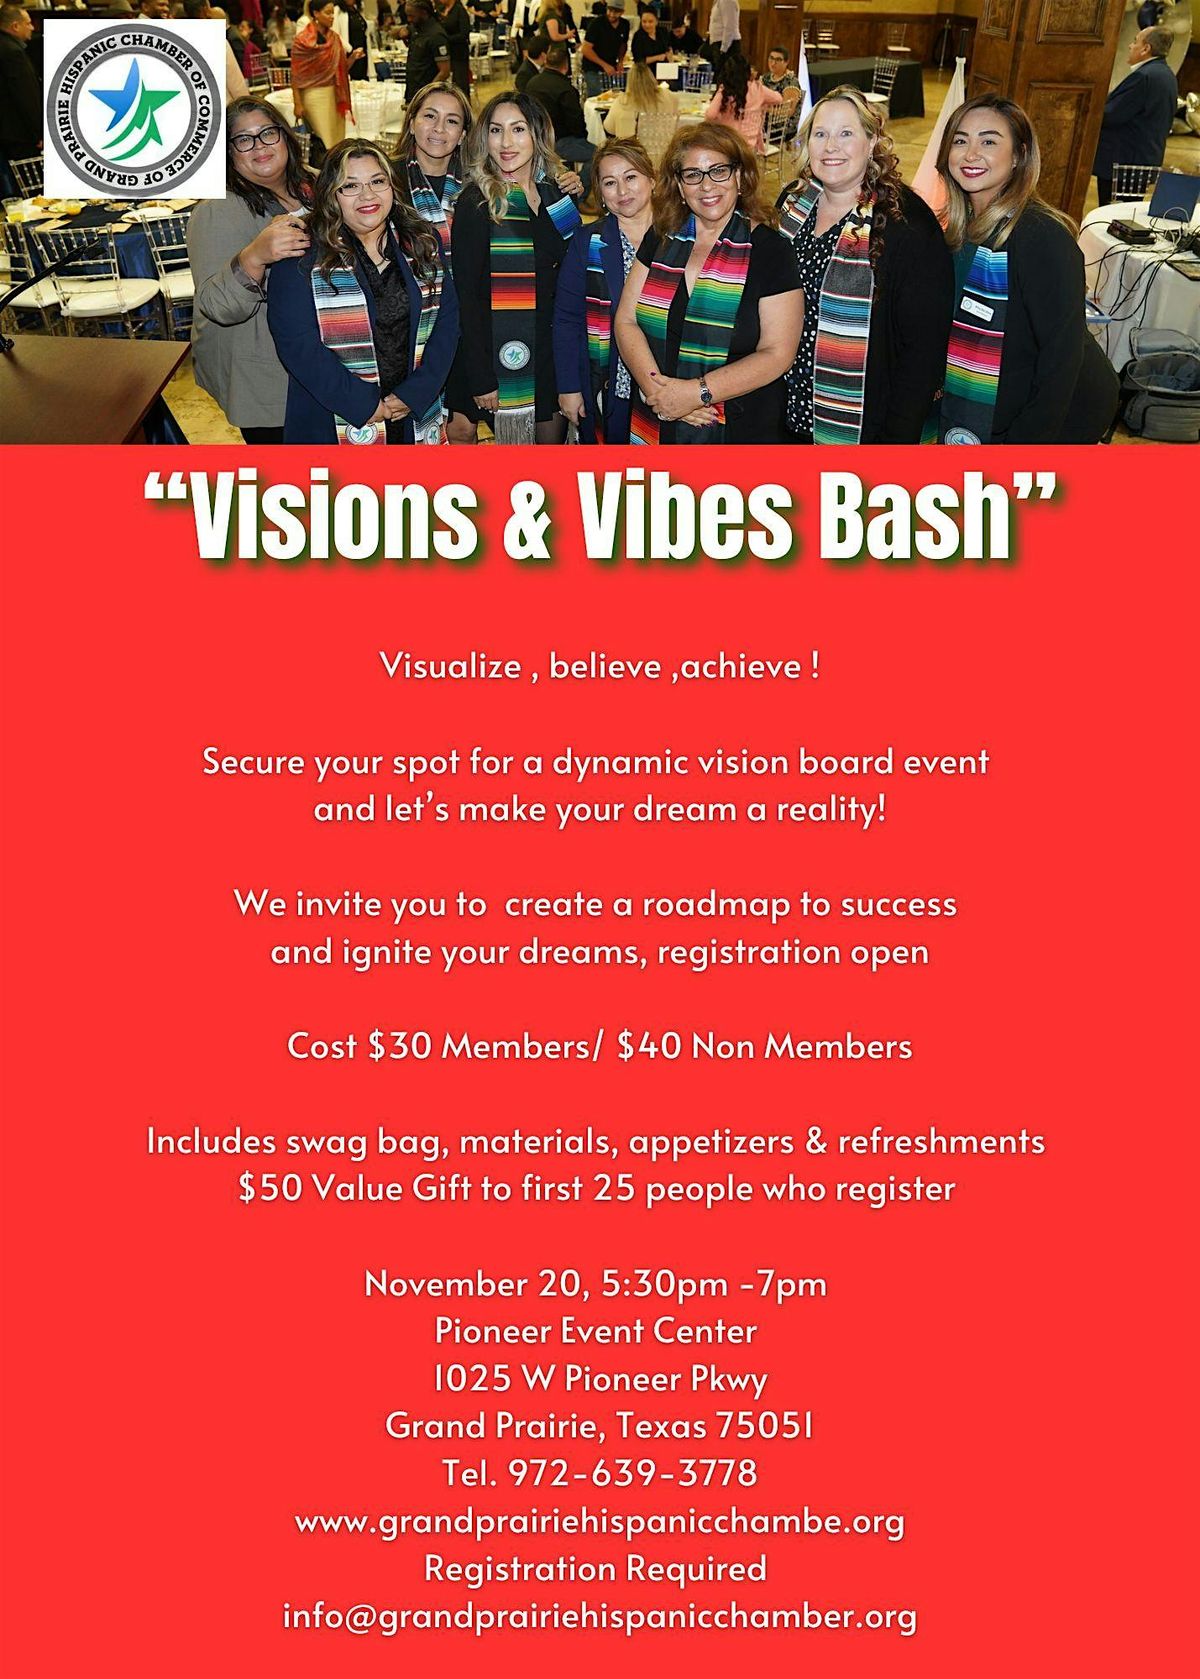 Vision & Vibes Bash Boss Chicas!